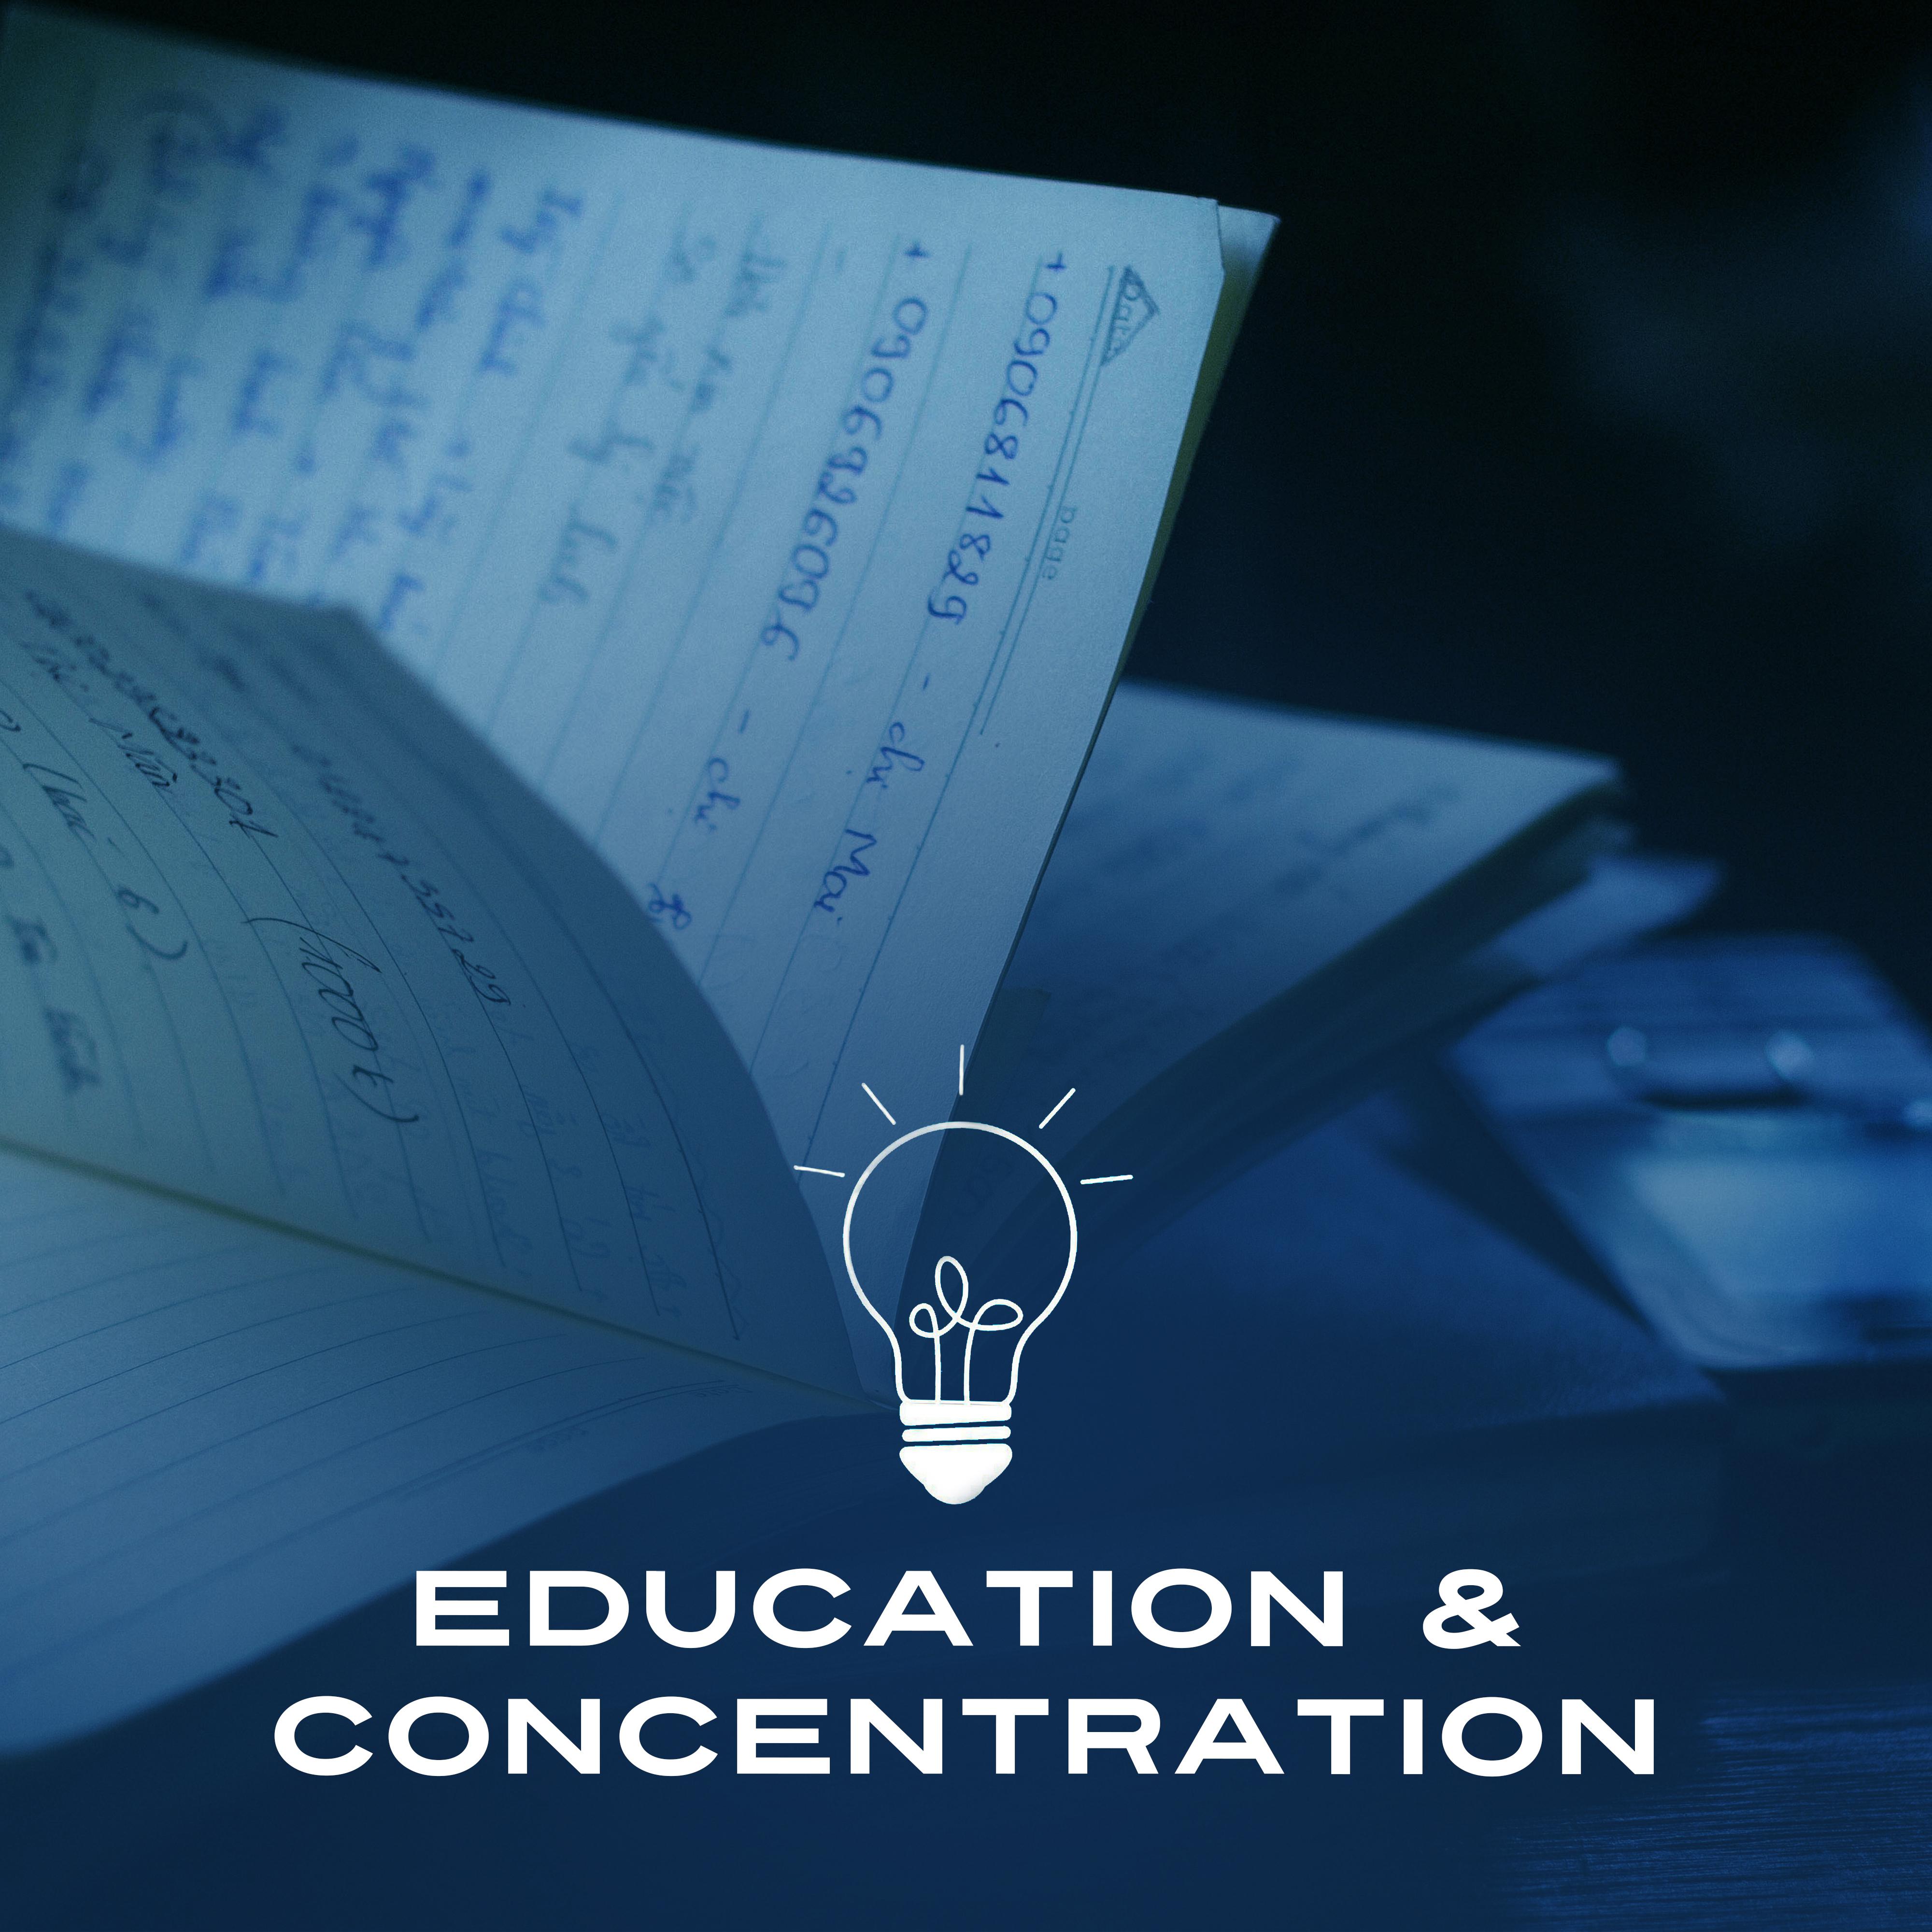 Education & Concentration – Music for Study, Deep Focus, Classical Songs for Easier Work, Liszt, Pachelbel, Brahms